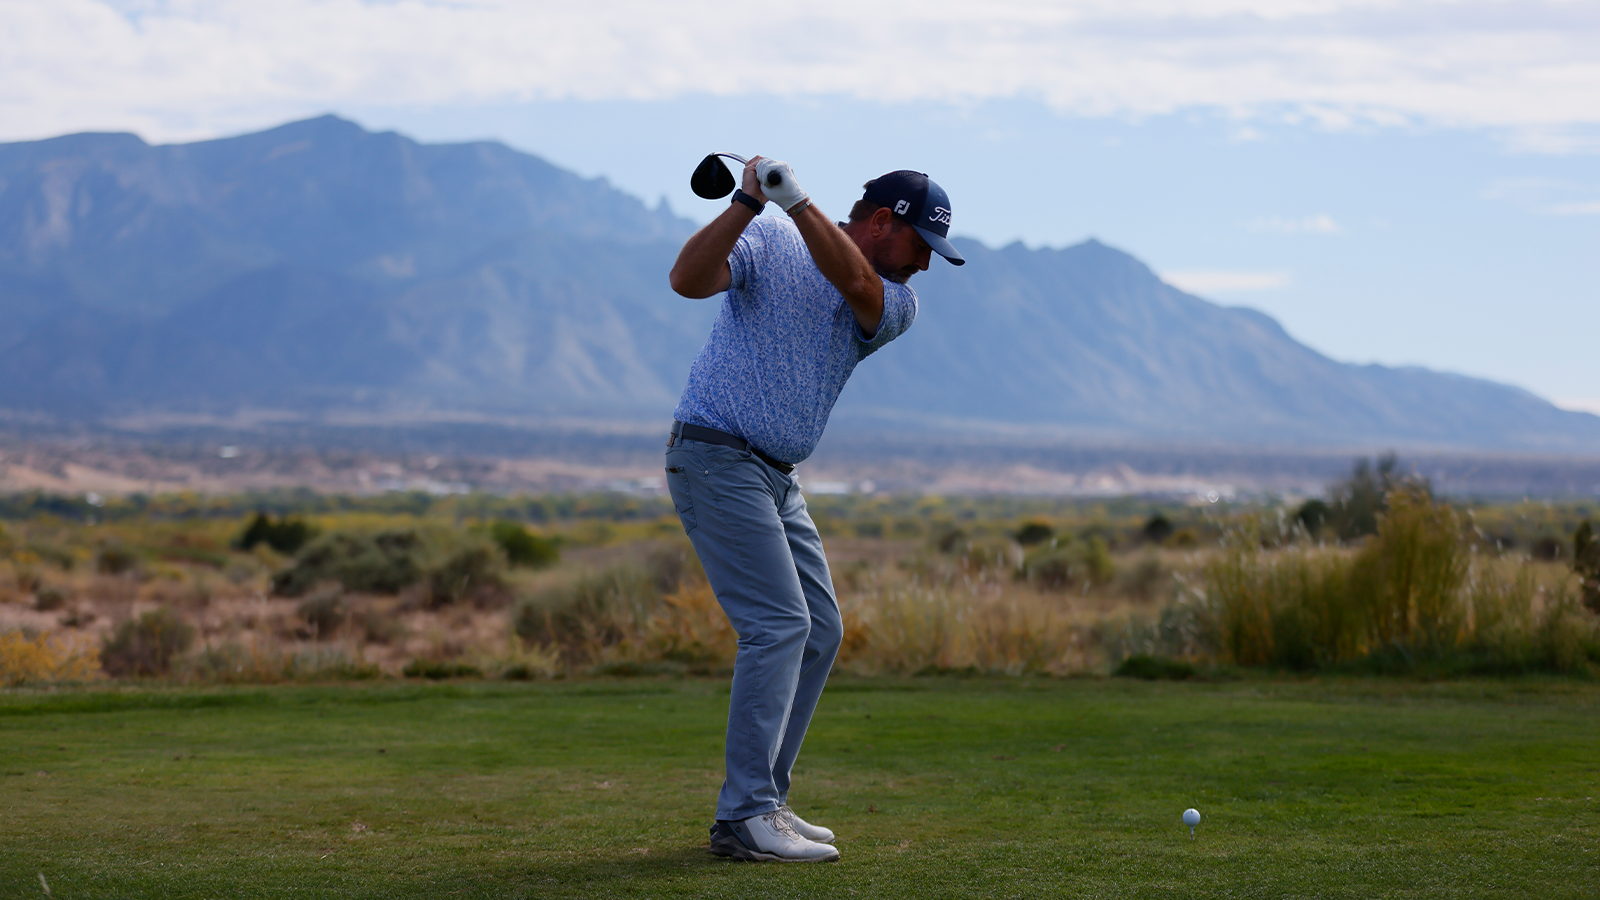 Alan Sorensen hits a tee shot on the third hole during the third round of the 34th Senior PGA Professional Championship at Twin Warriors Golf Club on October 15, 2022 in Santa Ana Pueblo, New Mexico. (Photo by Justin Edmonds/PGA of America)